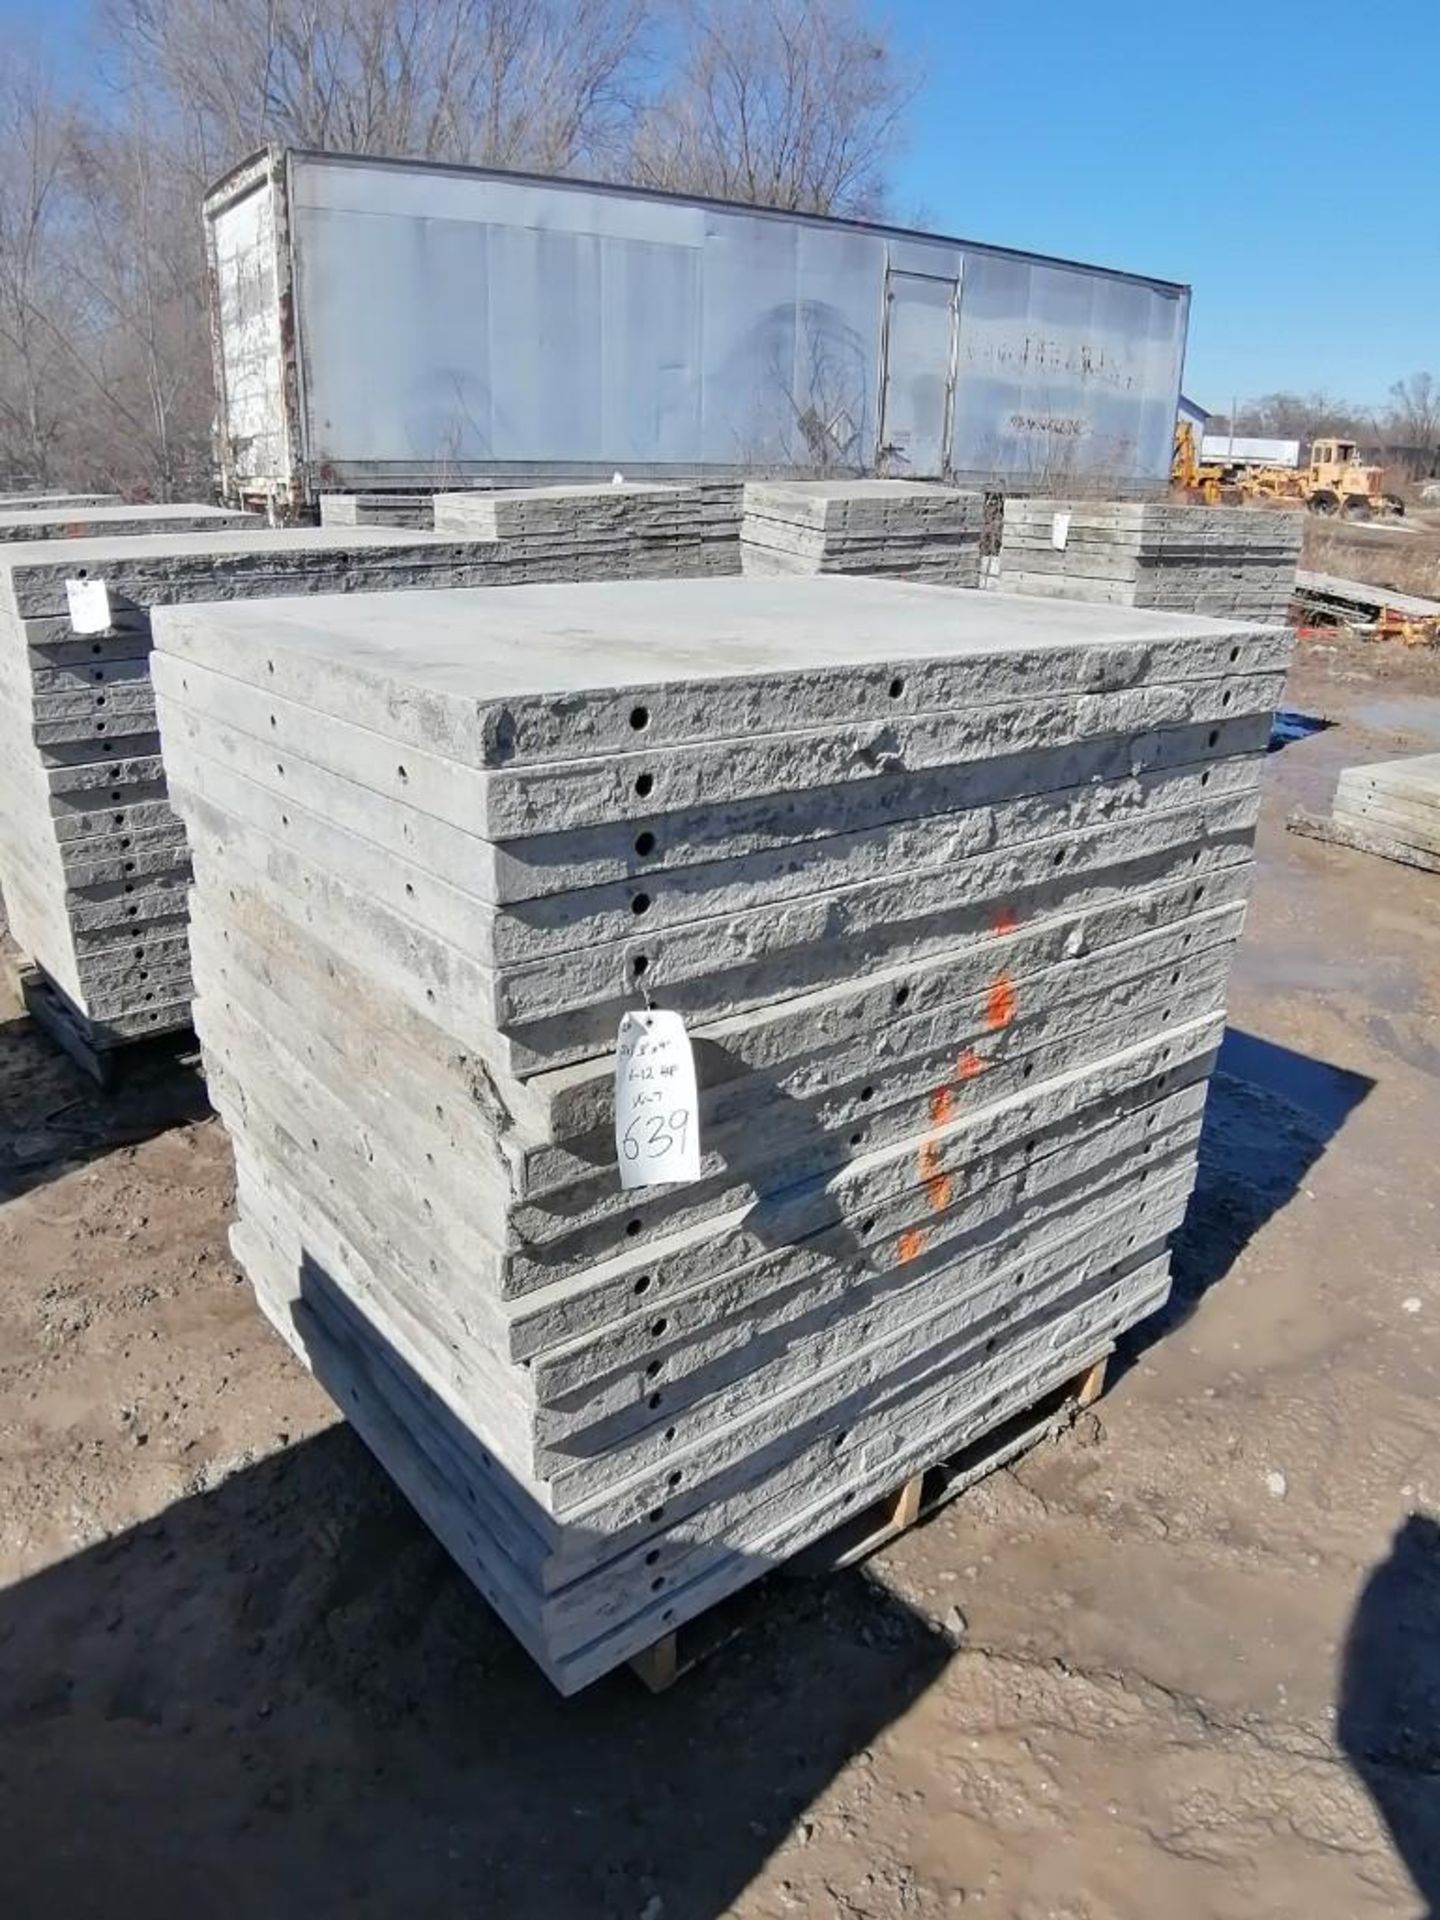 (20) 3' x 4' Wall-Ties Smooth Aluminum Concrete Forms 6-12 Hole Pattern. Located in Ottumwa, IA.